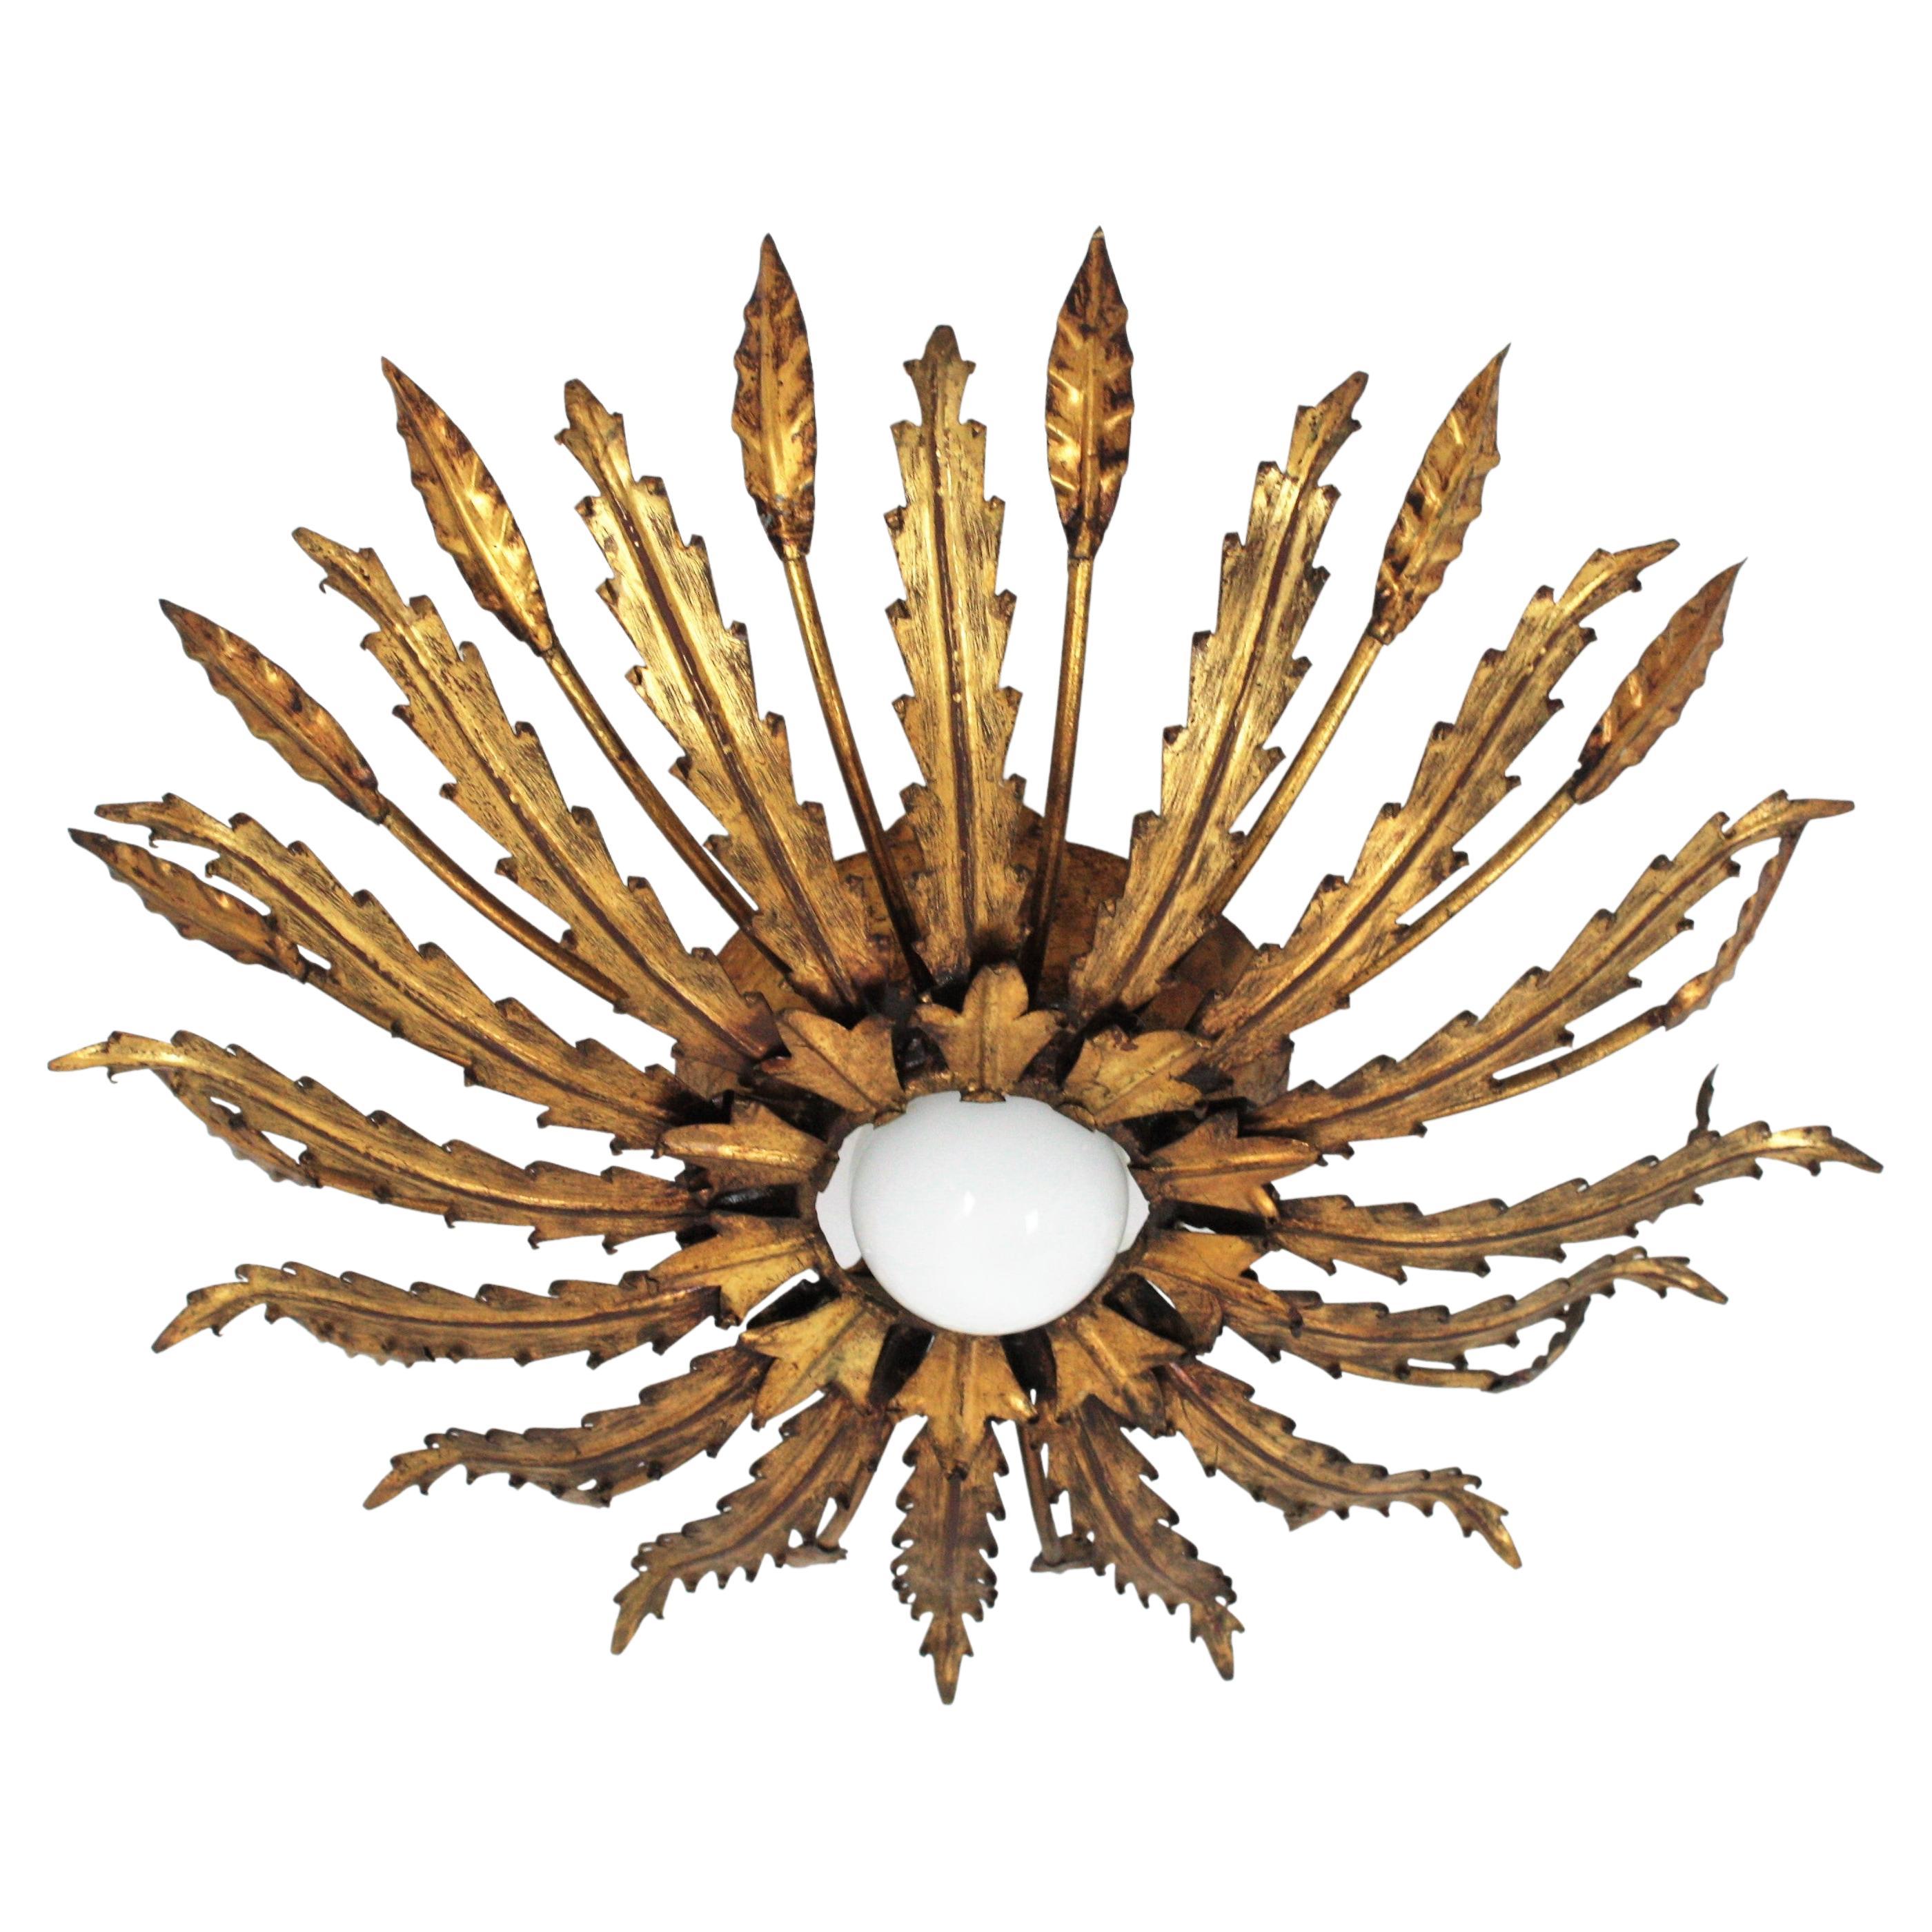 Sunburst ceiling light fixture, iron, gold leaf.
A beautiful Brutalist hand-hammered gilt iron sunburst flush mount with leafed design, France, 1950s.
Entirely made by hand.
Original Gold leaf gilding and fabulous patina.
This eye-catching